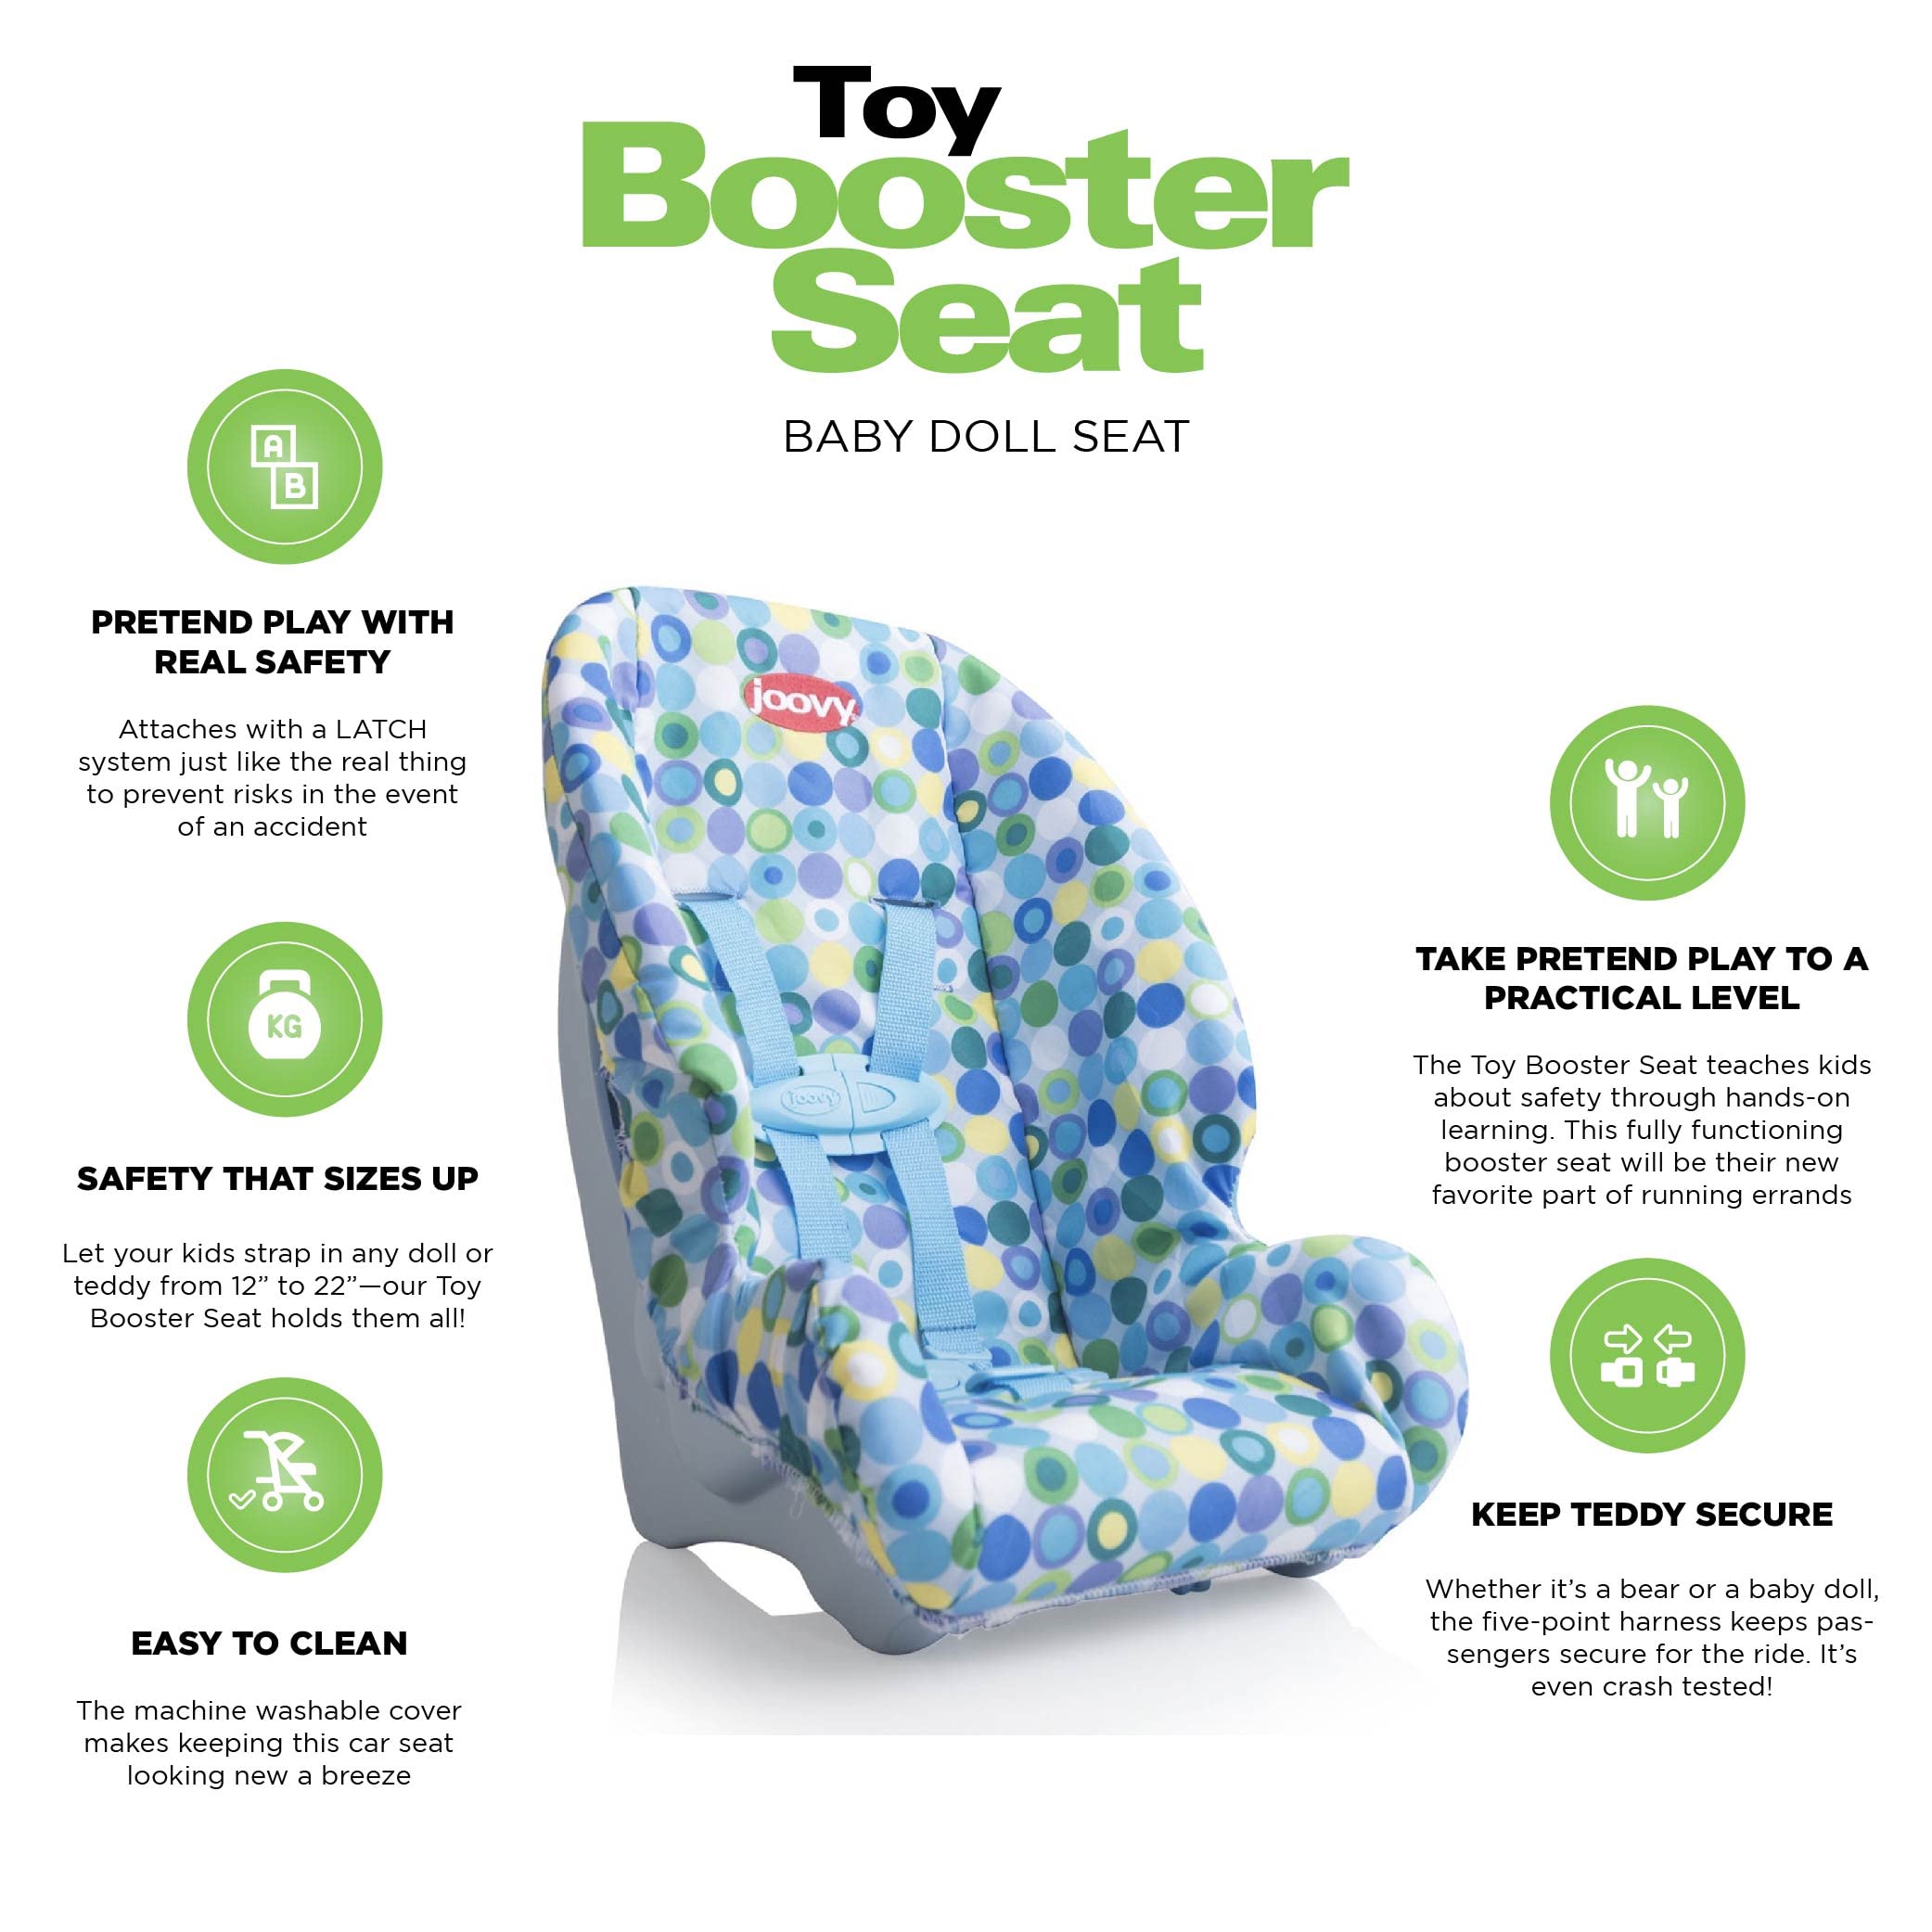 Joovy Toy Booster Seat & Functional Doll Car Seat Featuring Crash-Tested Latch System for Safety, Machine-Washable Cover for Easy Cleaning, and Five-Point Harness - Fits Dolls 12” to 22”, Blue